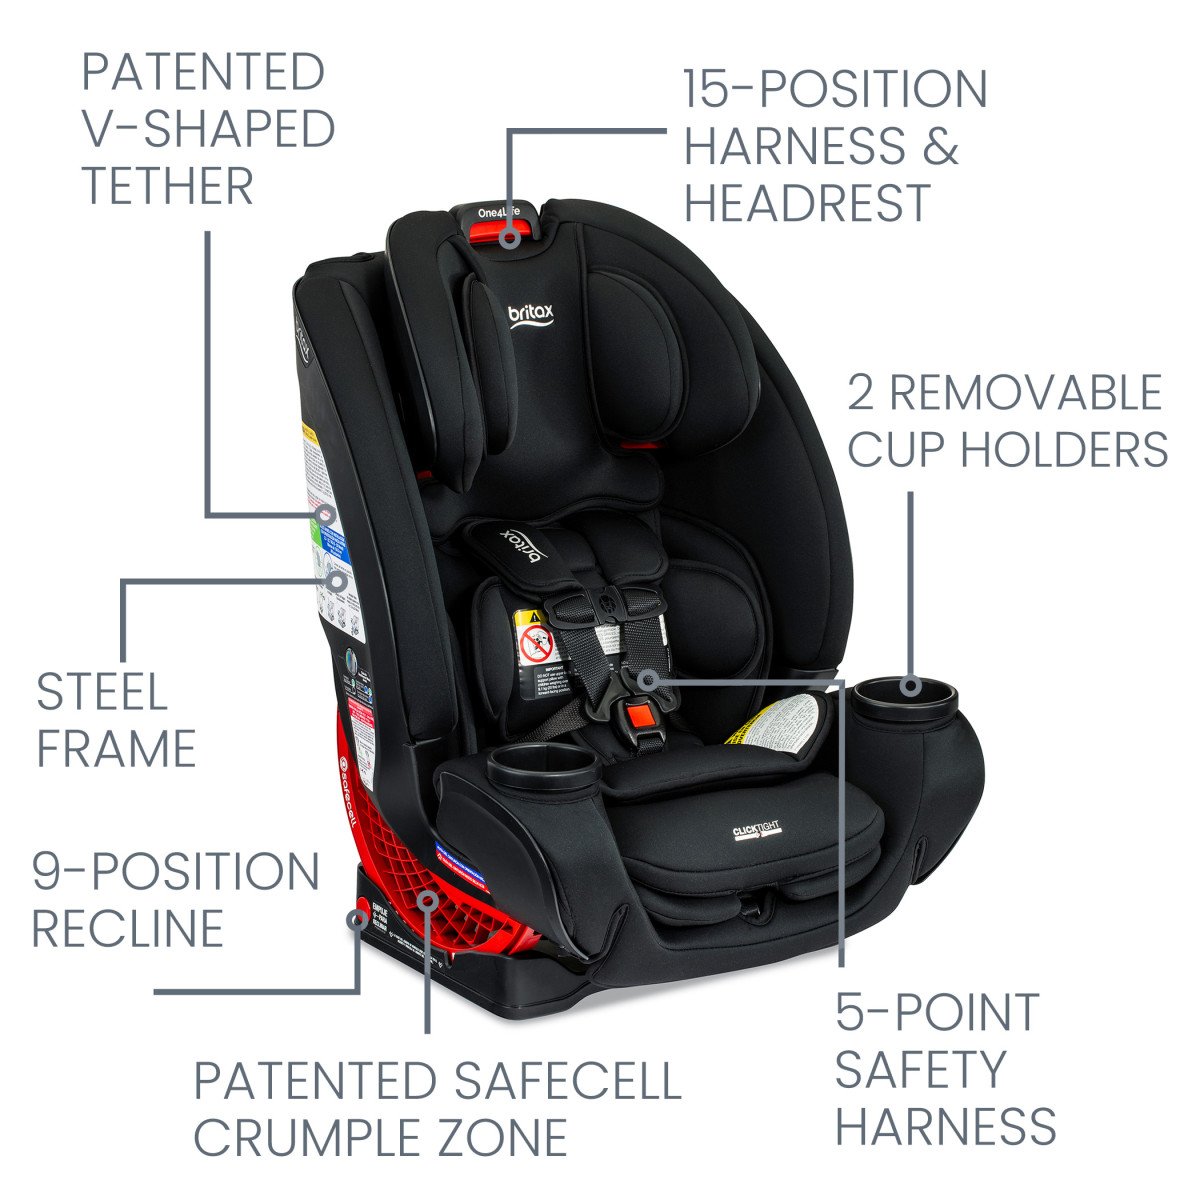  One4Life Onyx Car Seat with Key Features Labeled (Copy)